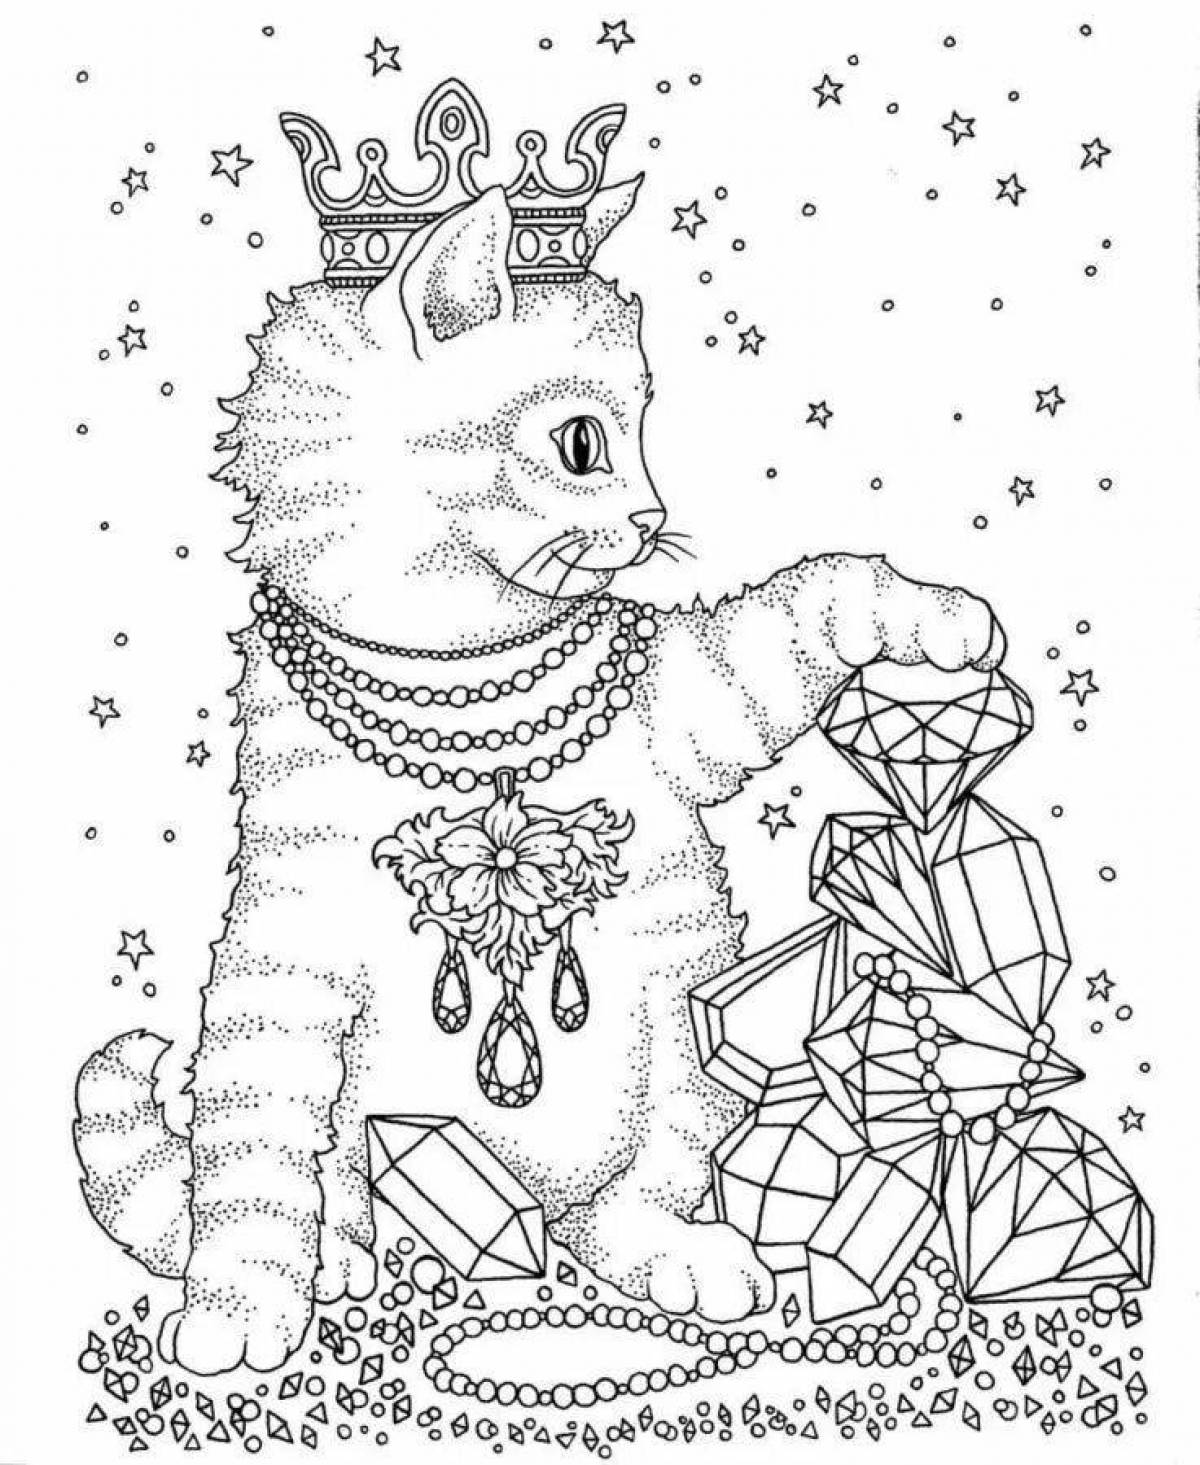 Coloring book sparkling Christmas cat